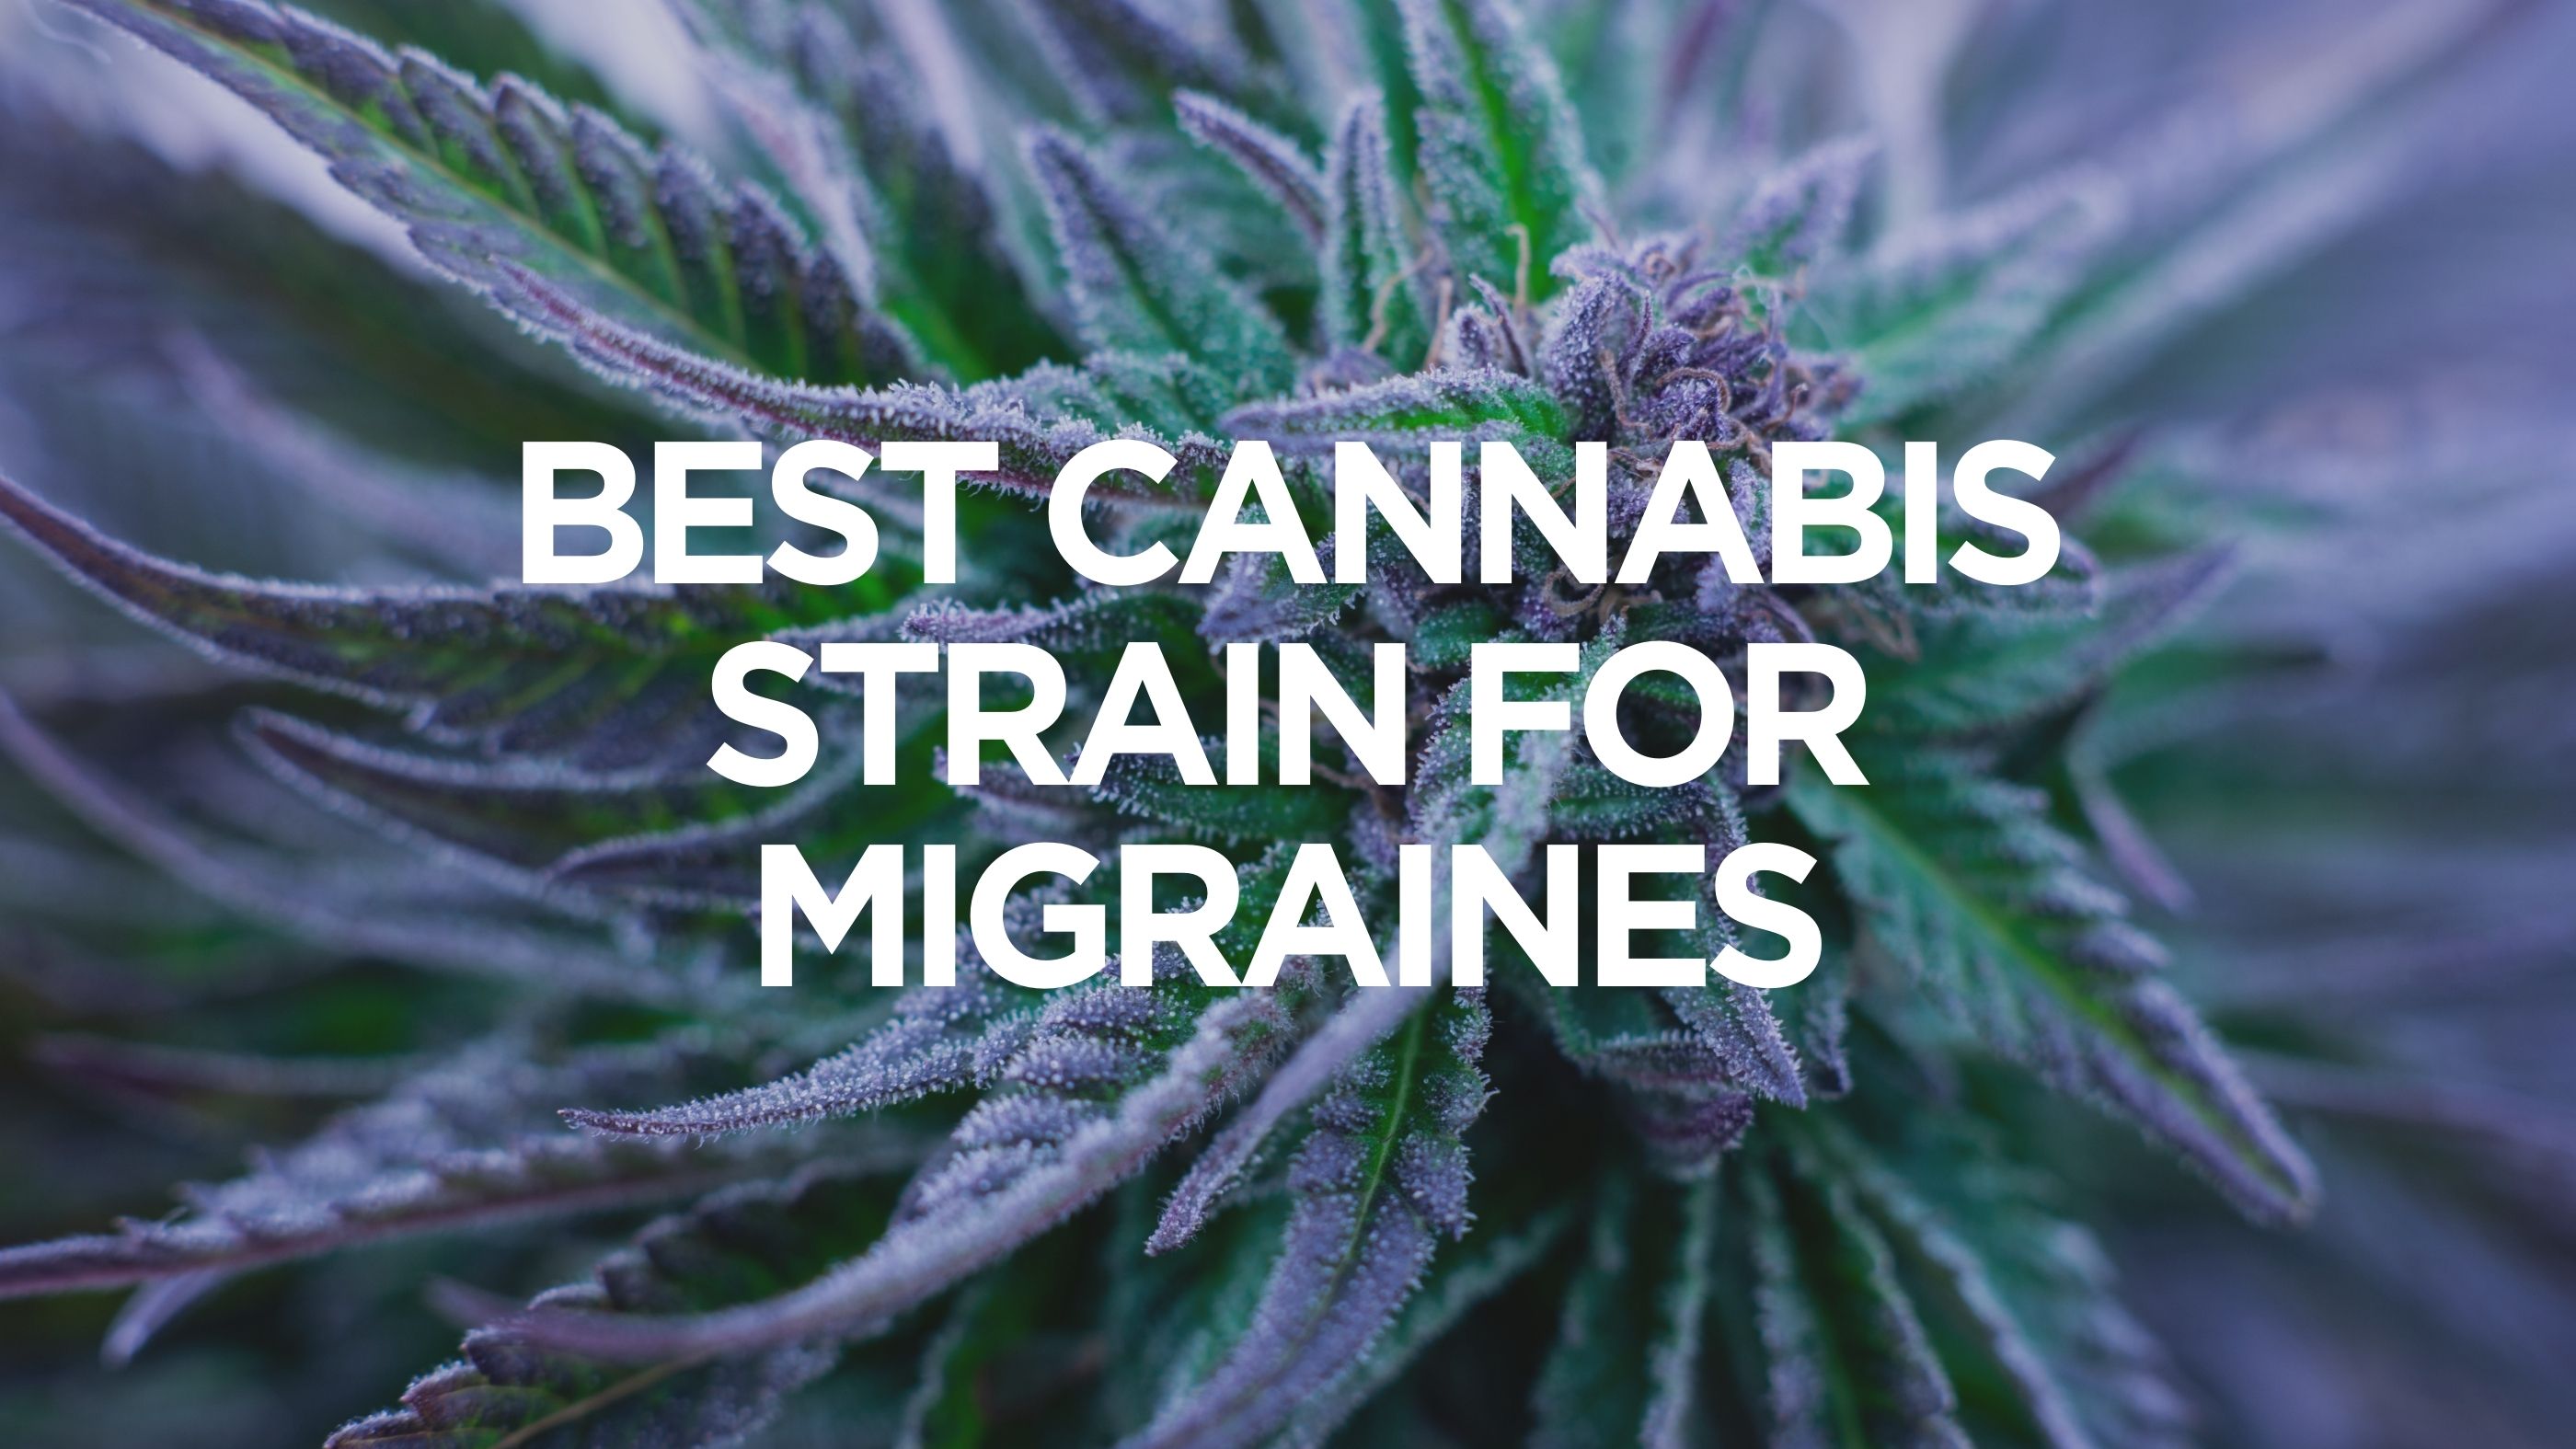 best-cannabis-strain-for-migraines